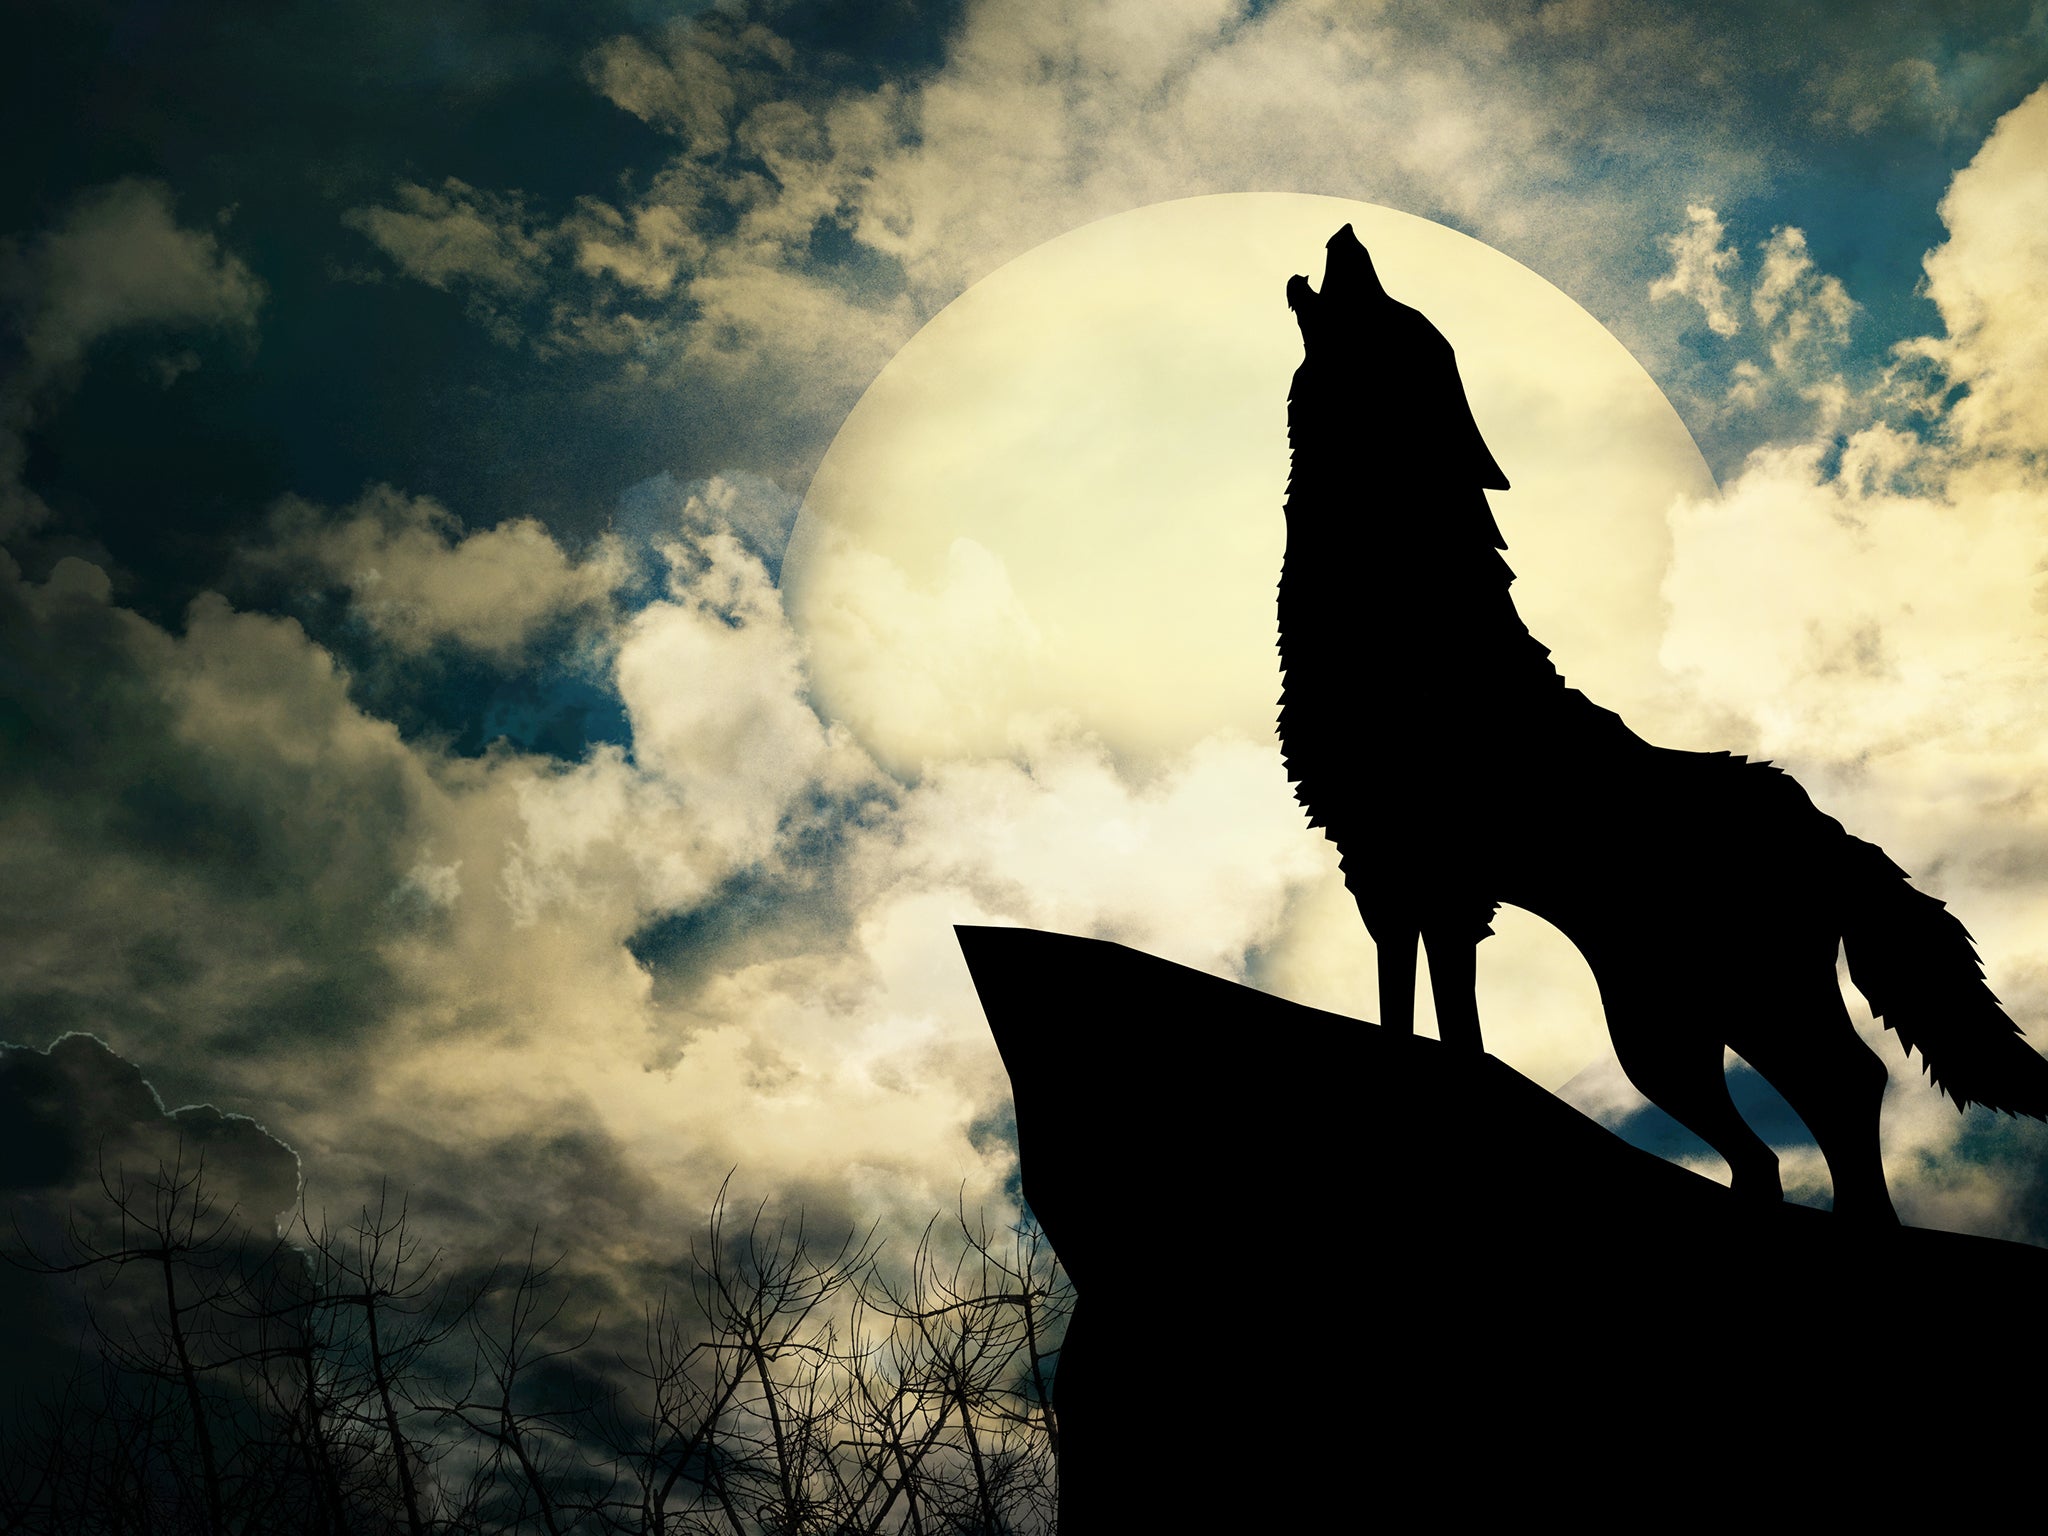 A wolf’s howl pierces the night